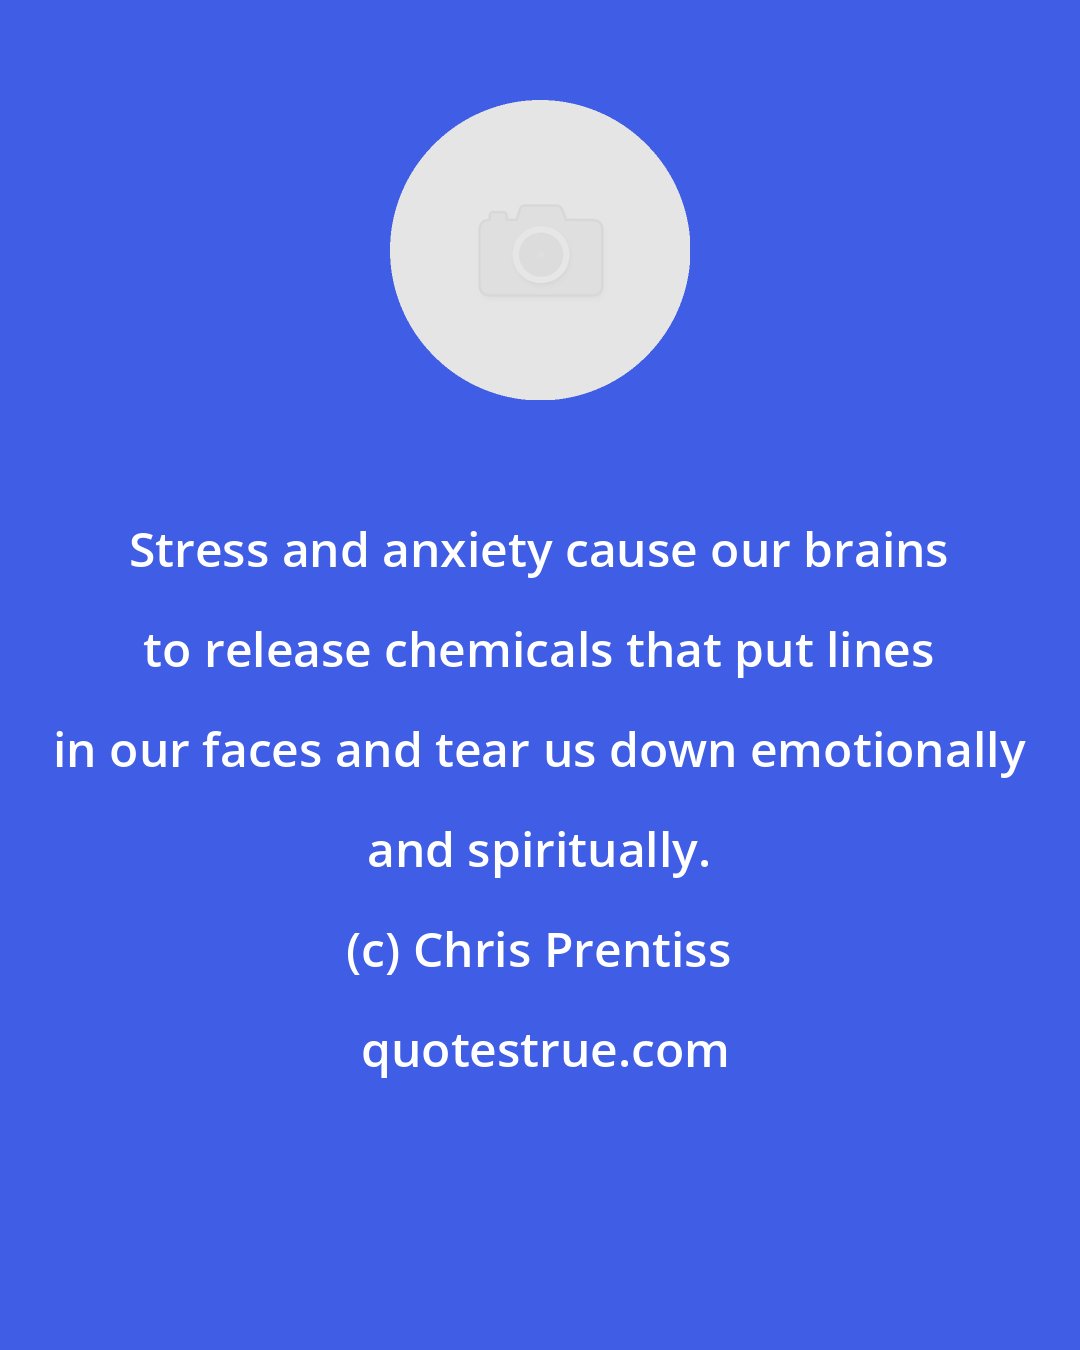 Chris Prentiss: Stress and anxiety cause our brains to release chemicals that put lines in our faces and tear us down emotionally and spiritually.